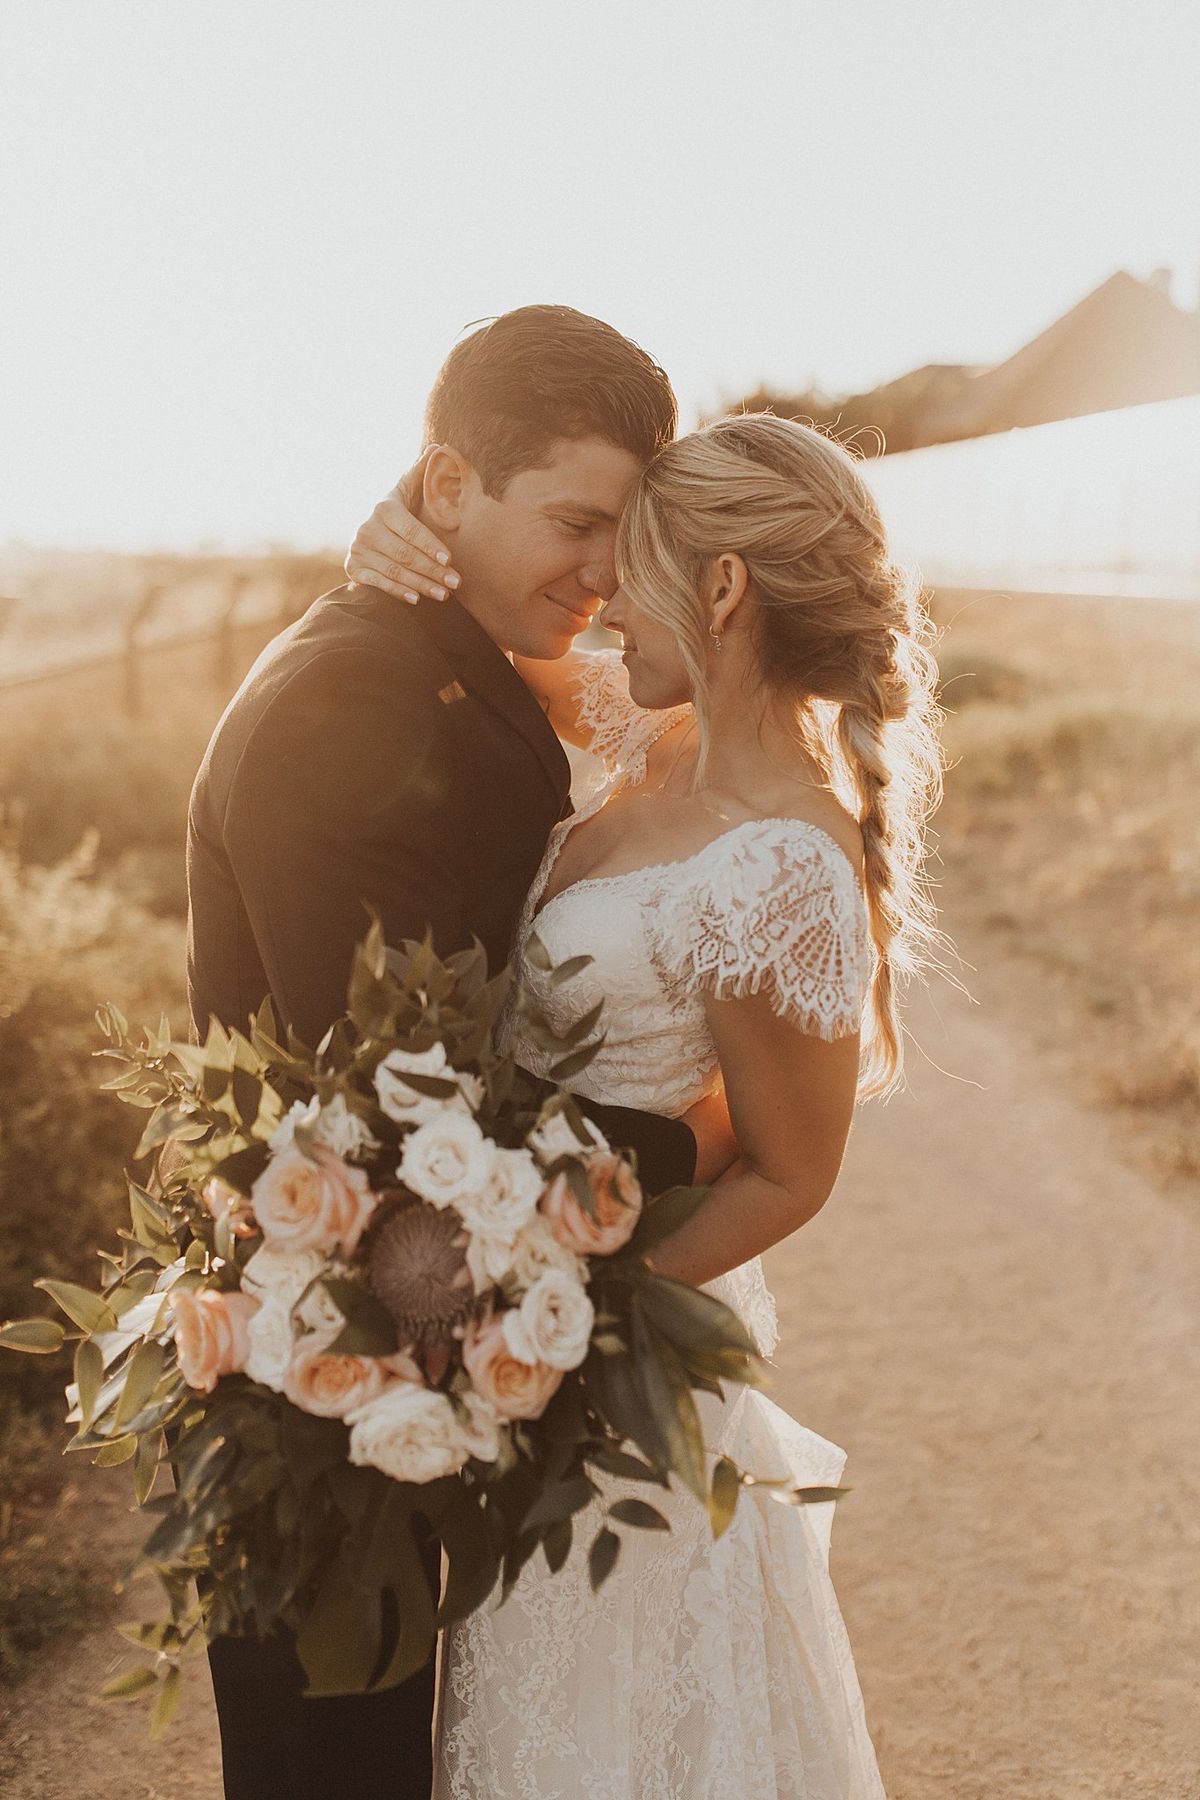 How to find the right elopement photographer with a warm and candid editing style